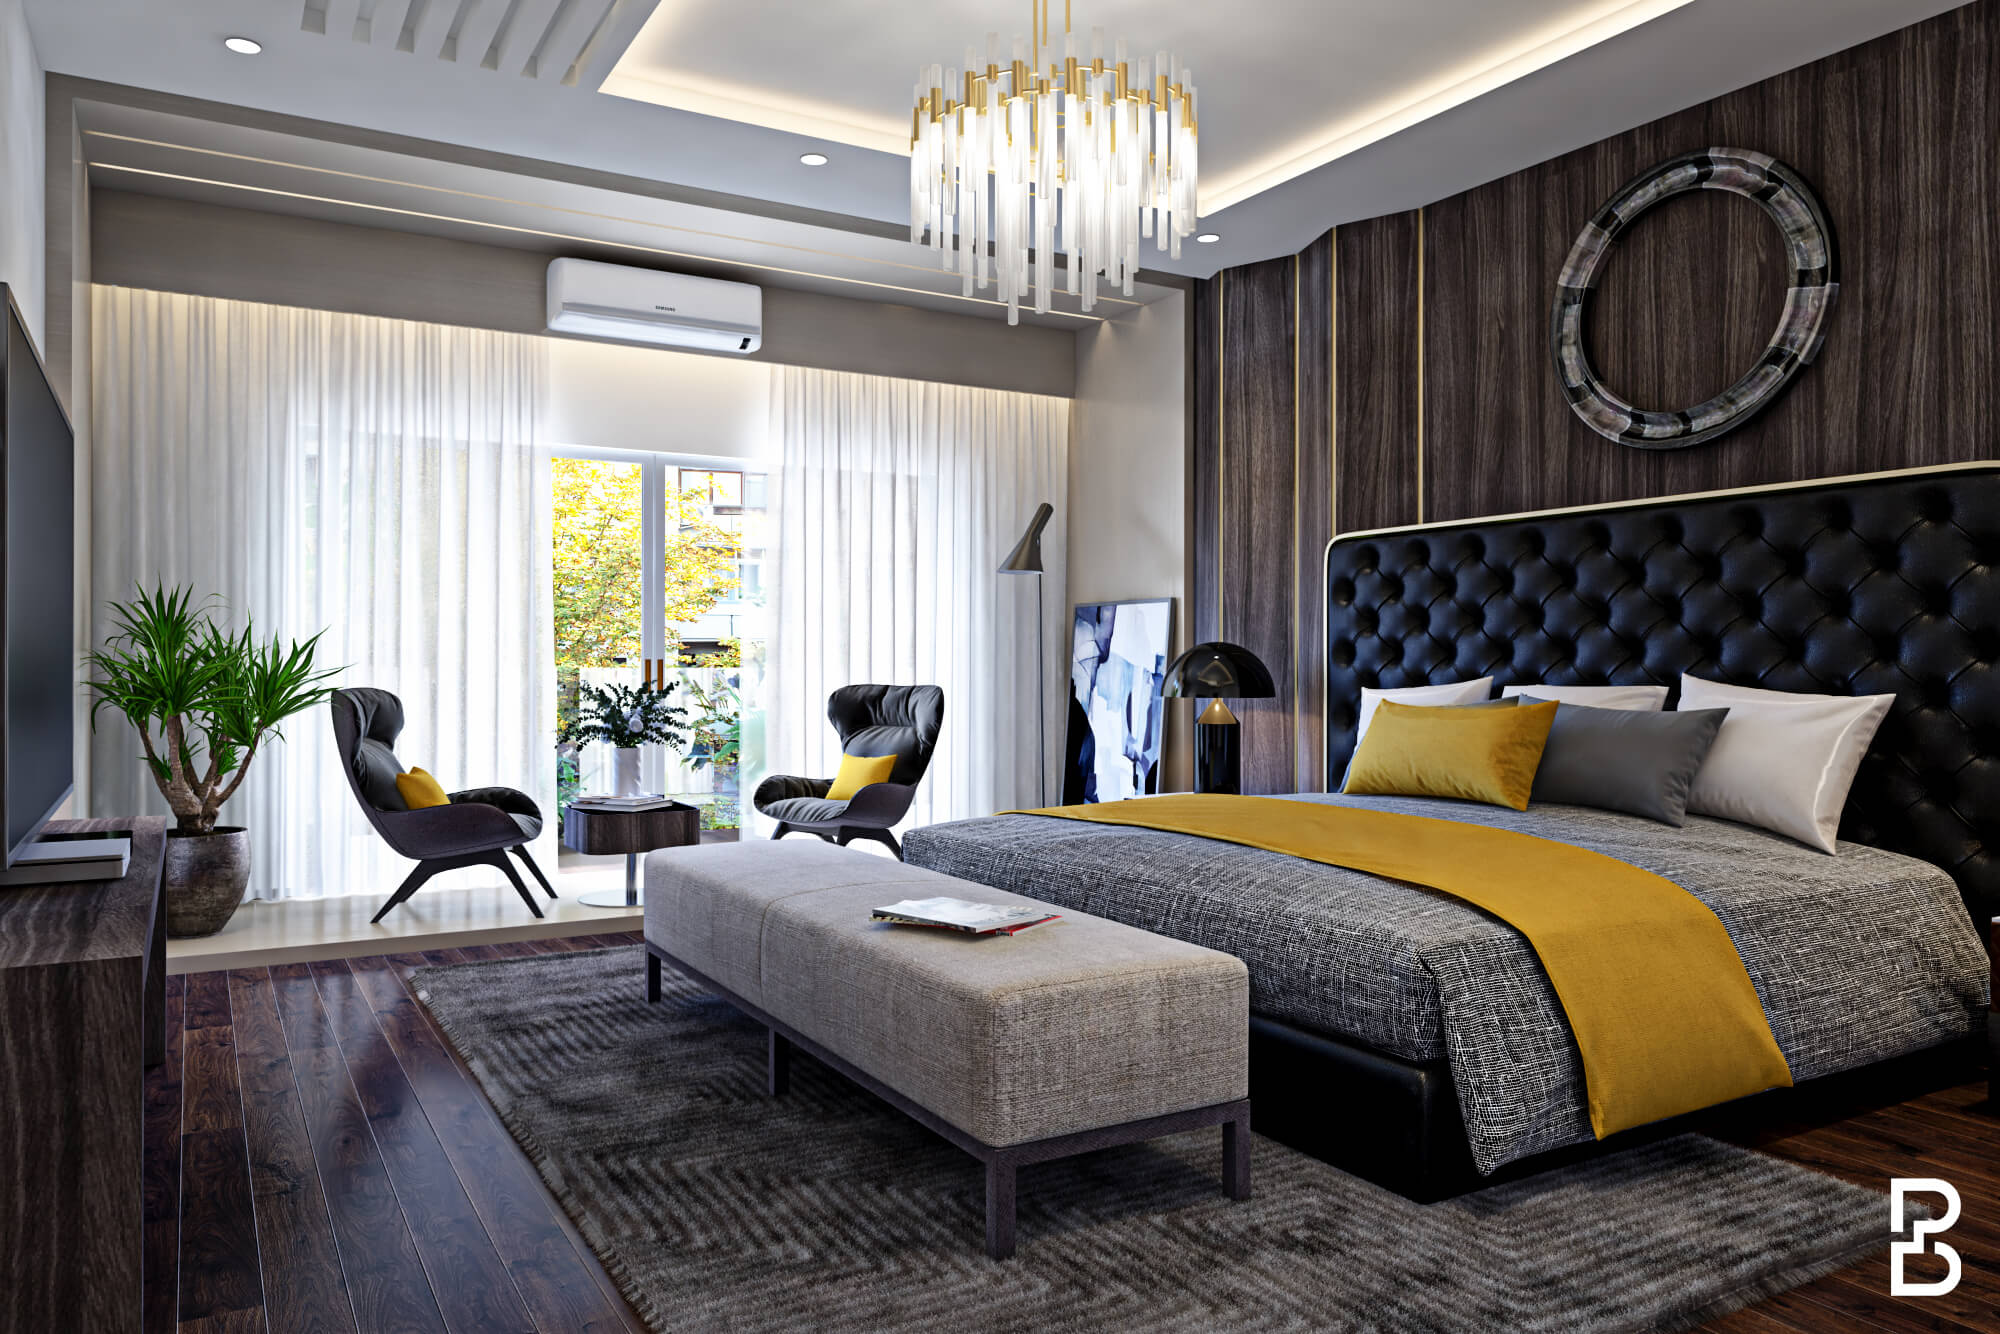 Top 7 Master Bedroom Design Ideas For Your Home - Wooden Affair